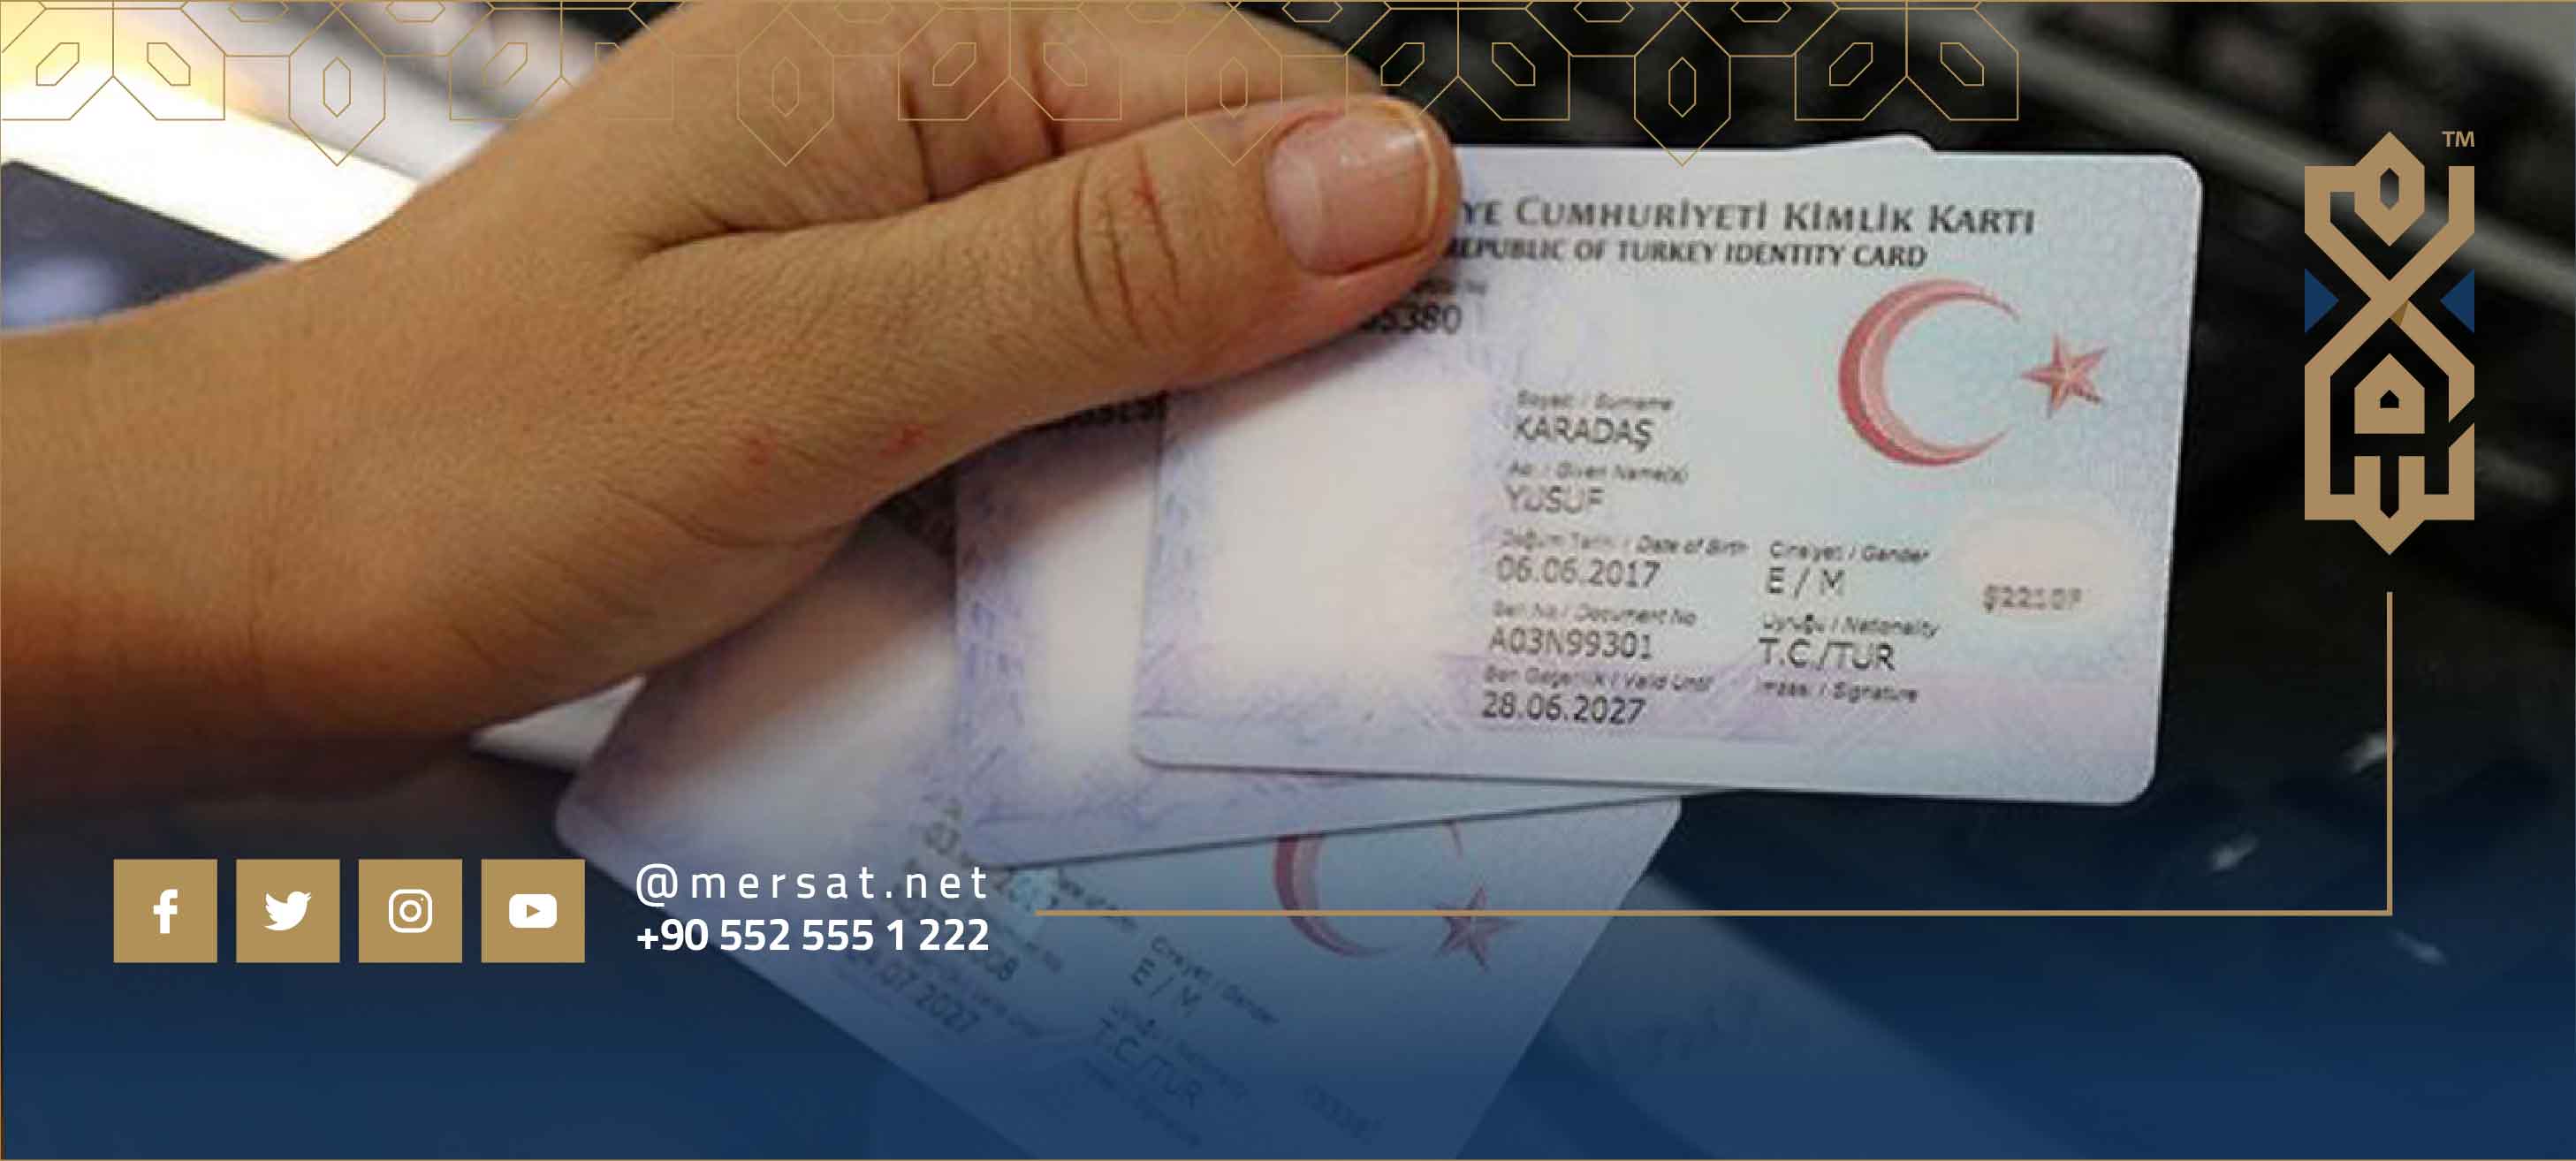 Visit Turkey and get one of the residence permits